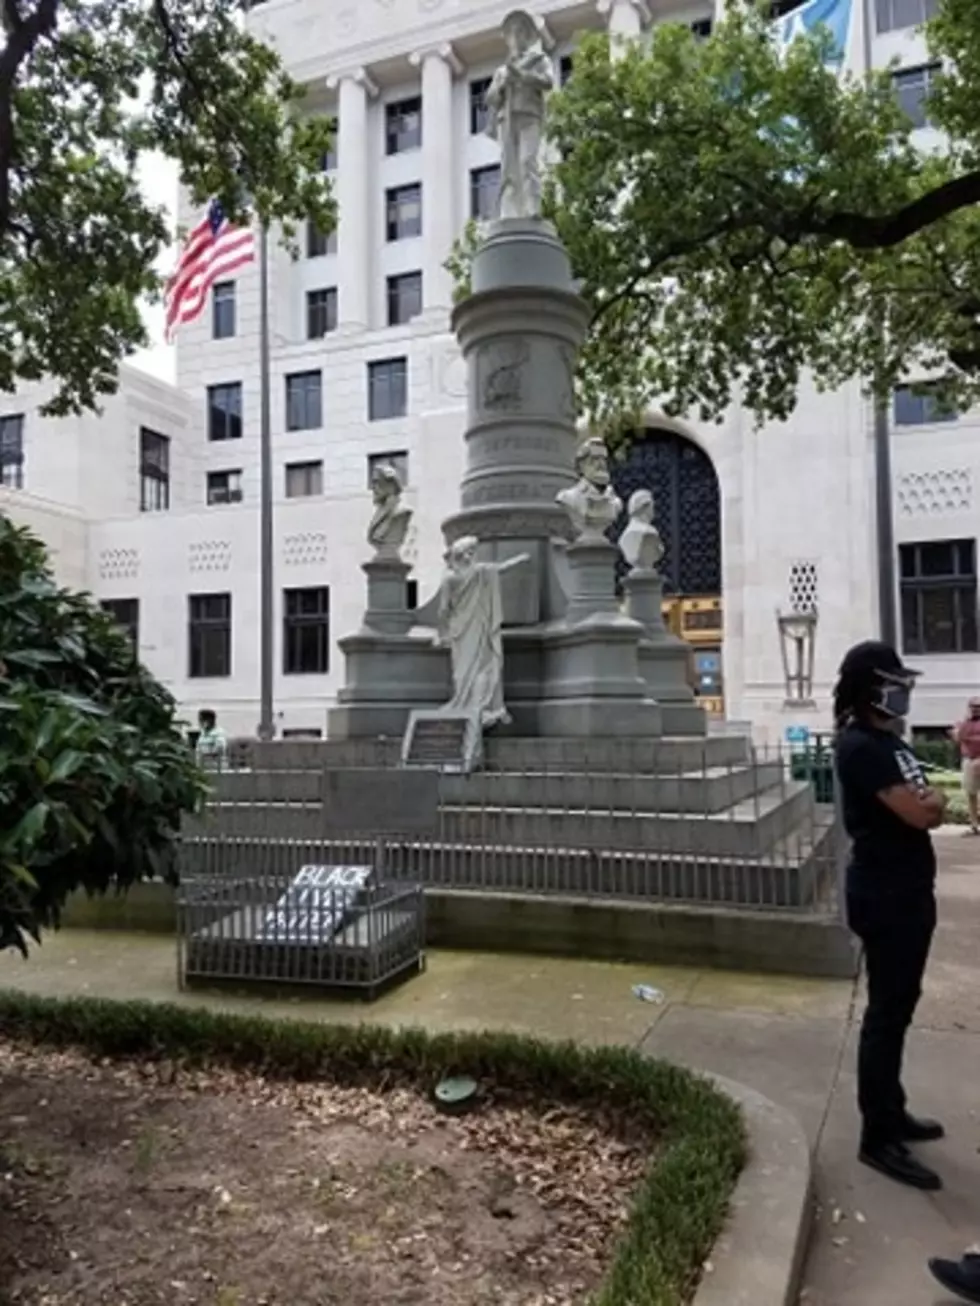 The Battle Over The Caddo Confederate Monument Is Not A New One [VIDEO]